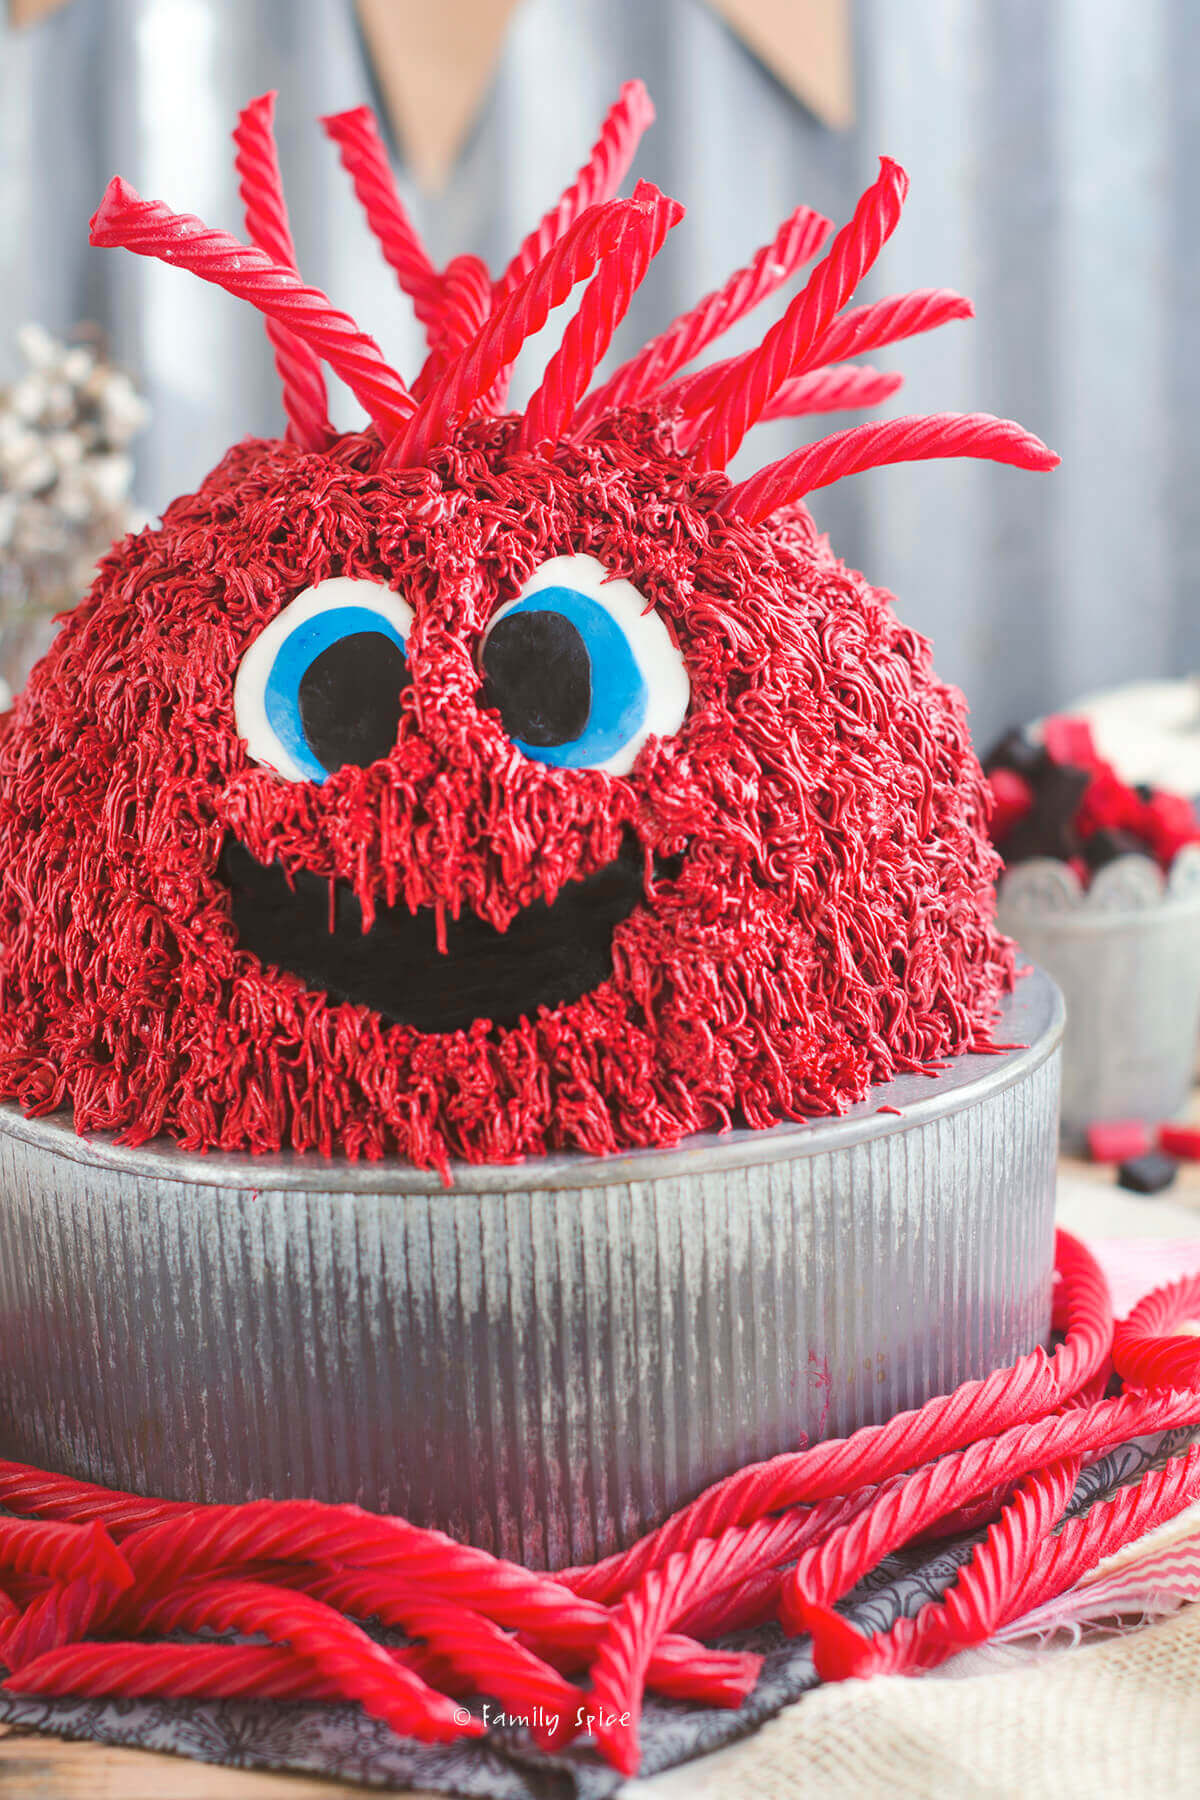 How to Make a Red Vine Monster Cake - Family Spice